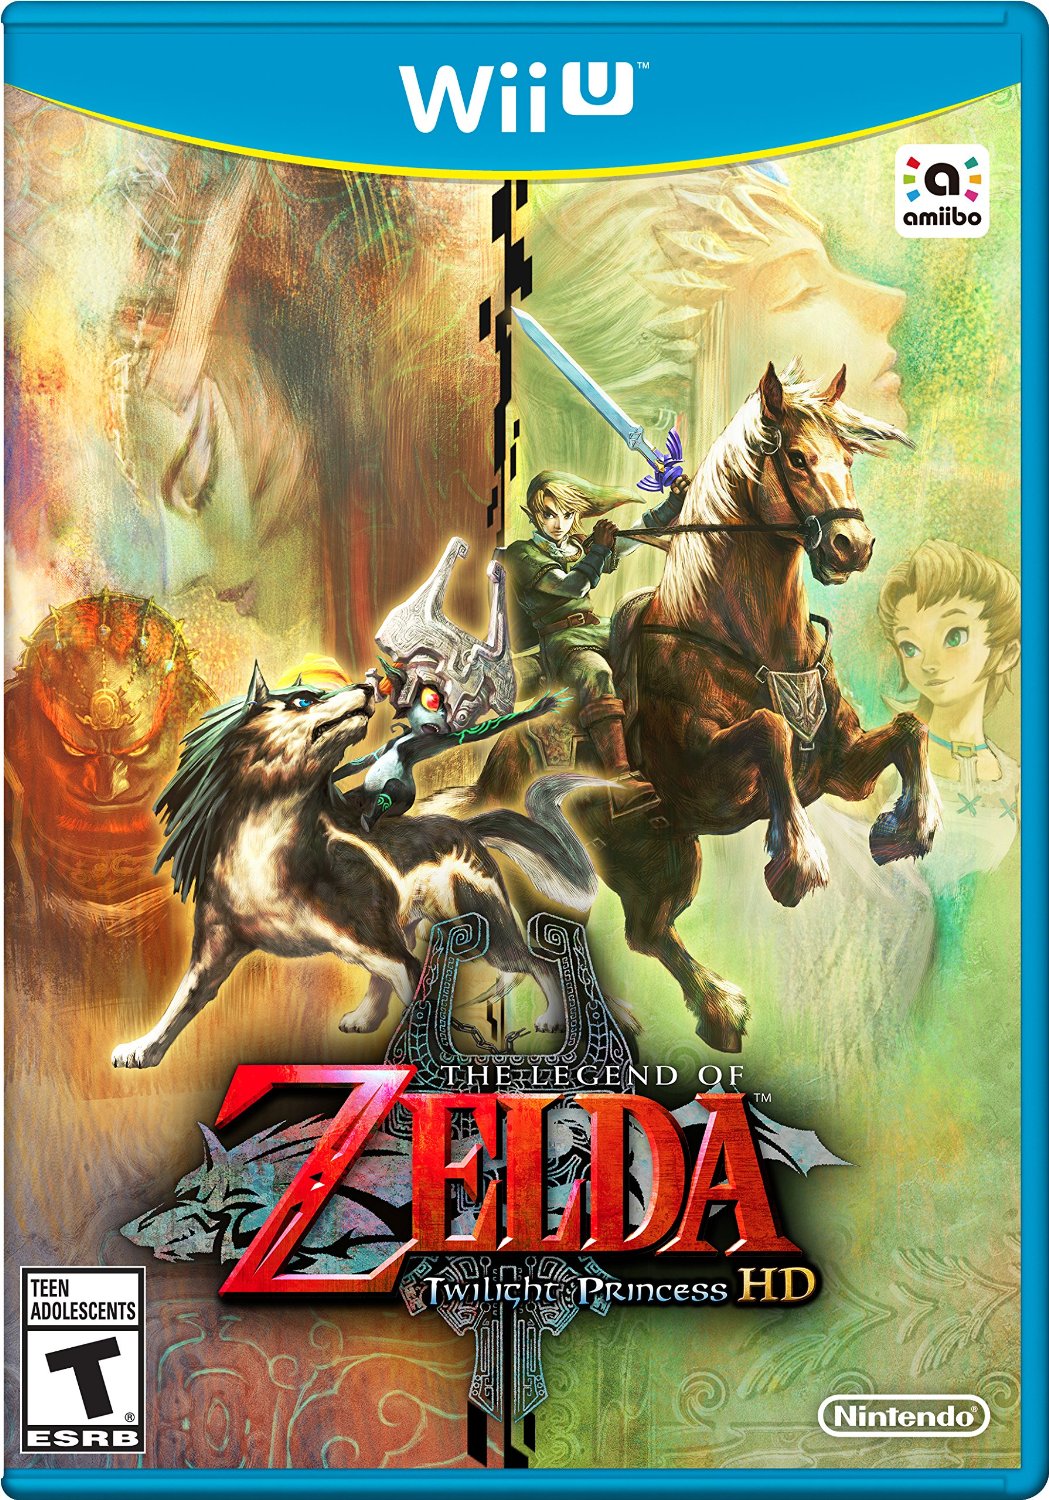 Updated Twilight Princess Hd Officially Announced Along With A Wolf Link Amiibo And A Small Zelda Wii U Clip Zelda Dungeon